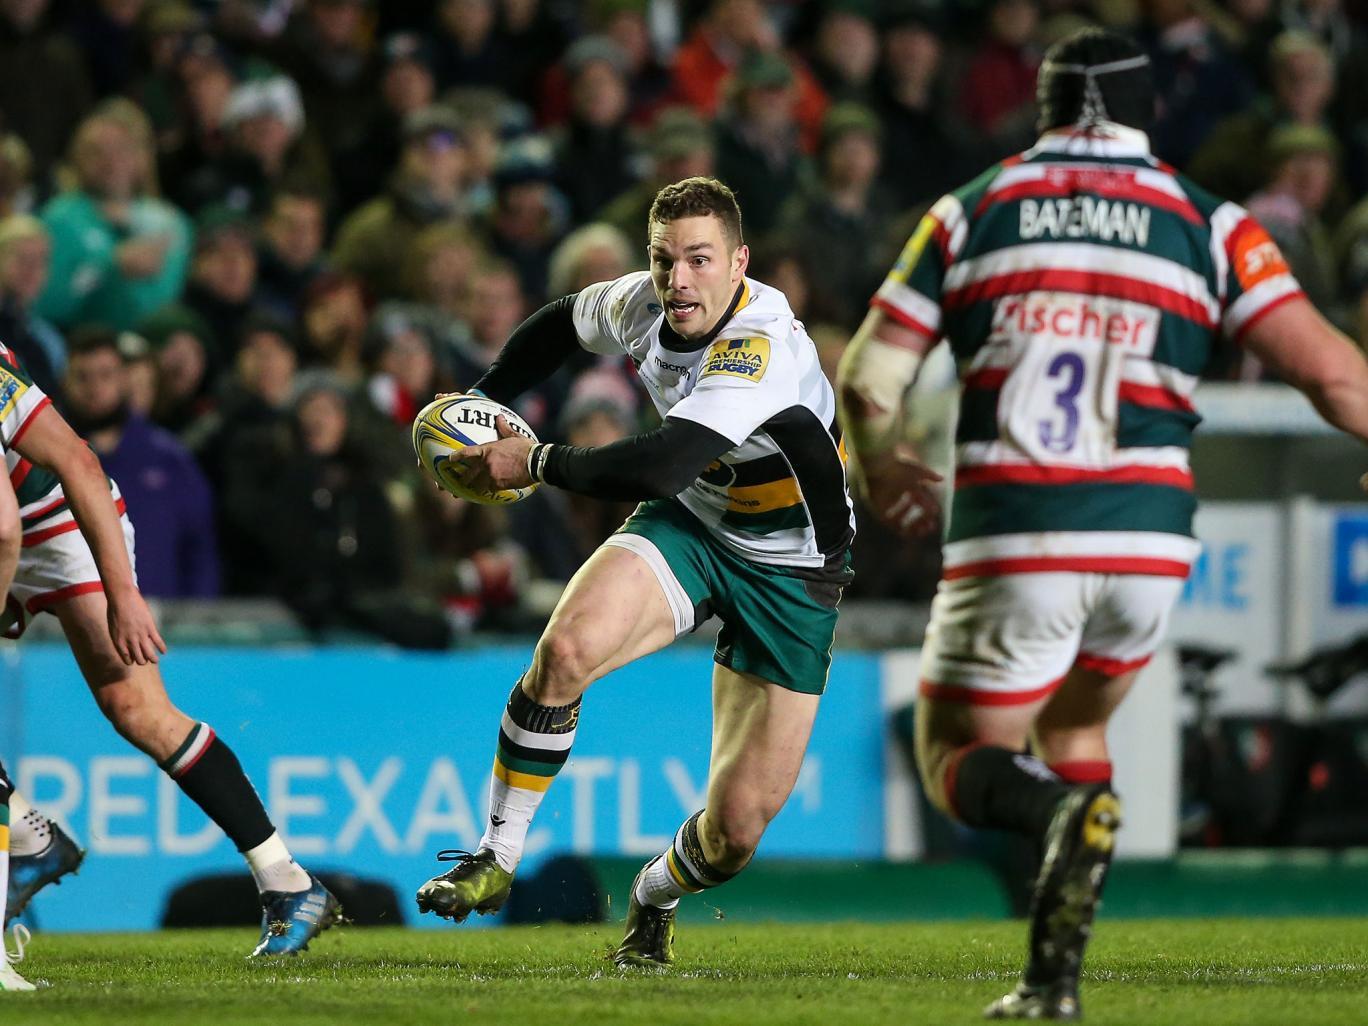 George North suffered a concussion in Northampton Saints' match against Leicester Tigers